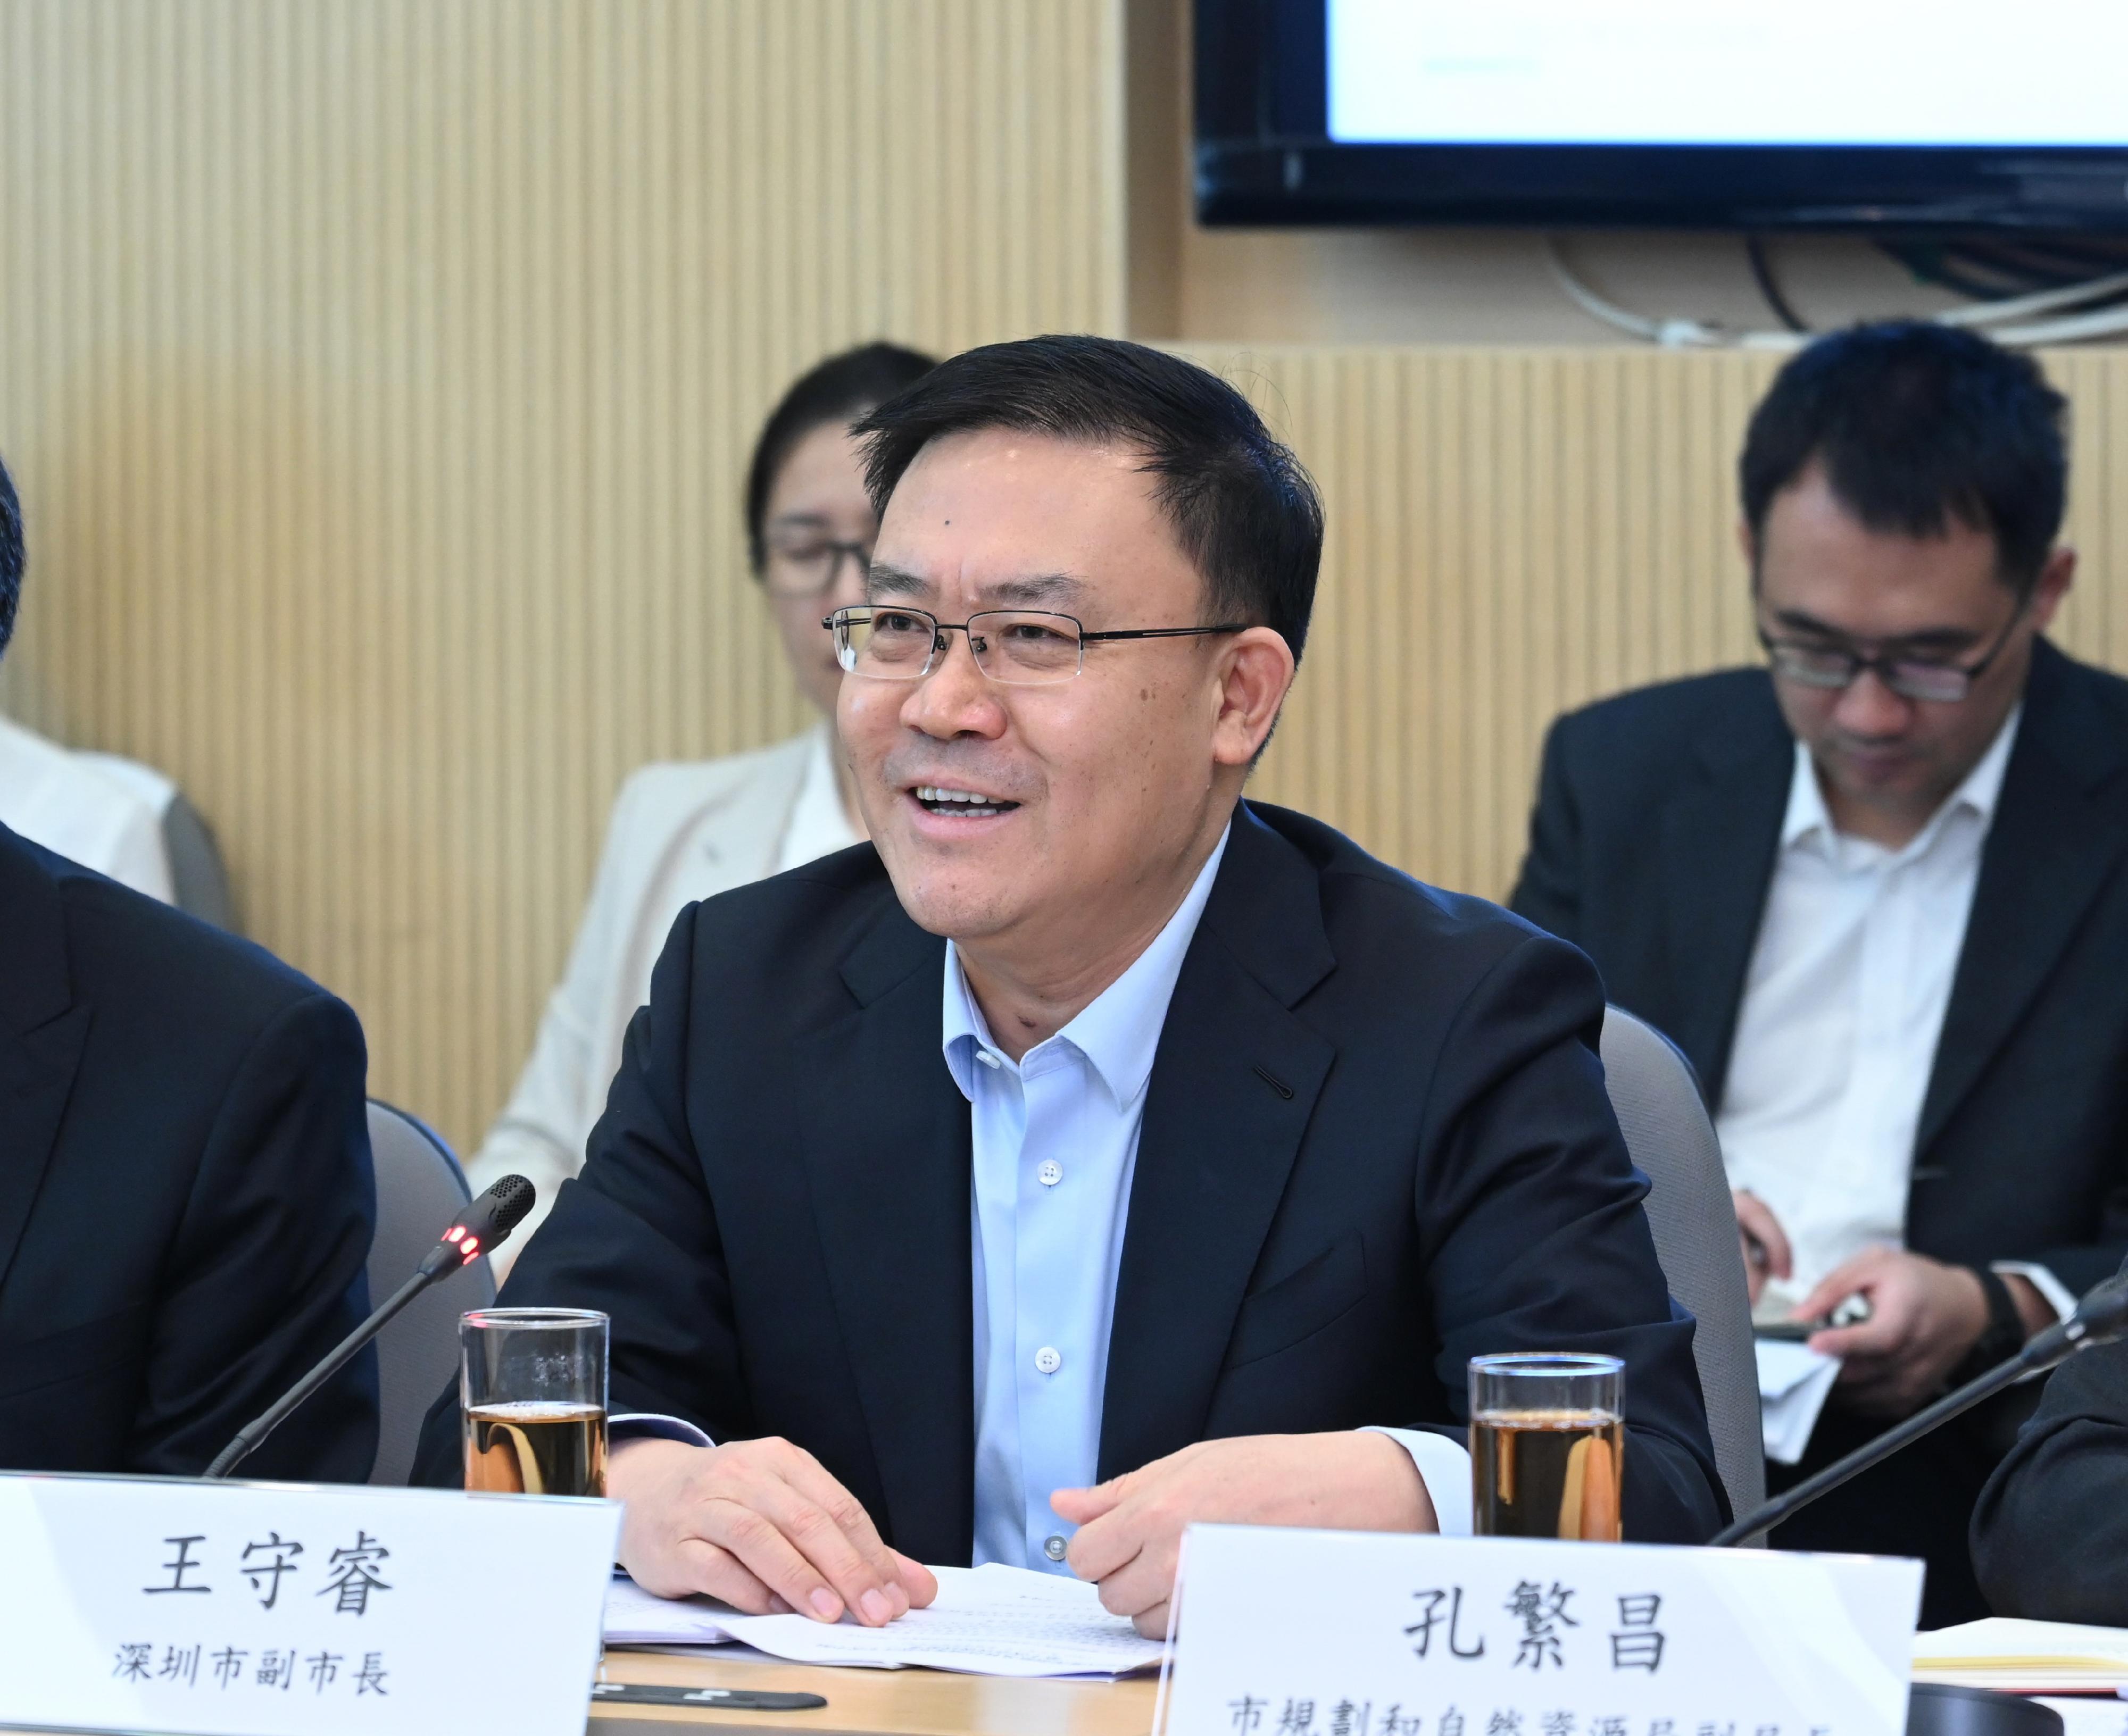 Vice Mayor of Shenzhen Municipal People's Government Mr Wang Shourui chaired the 10th meeting of the Joint Task Force on the Development of the Hong Kong-Shenzhen Innovation and Technology Park in the Loop in Hong Kong today (September 7).